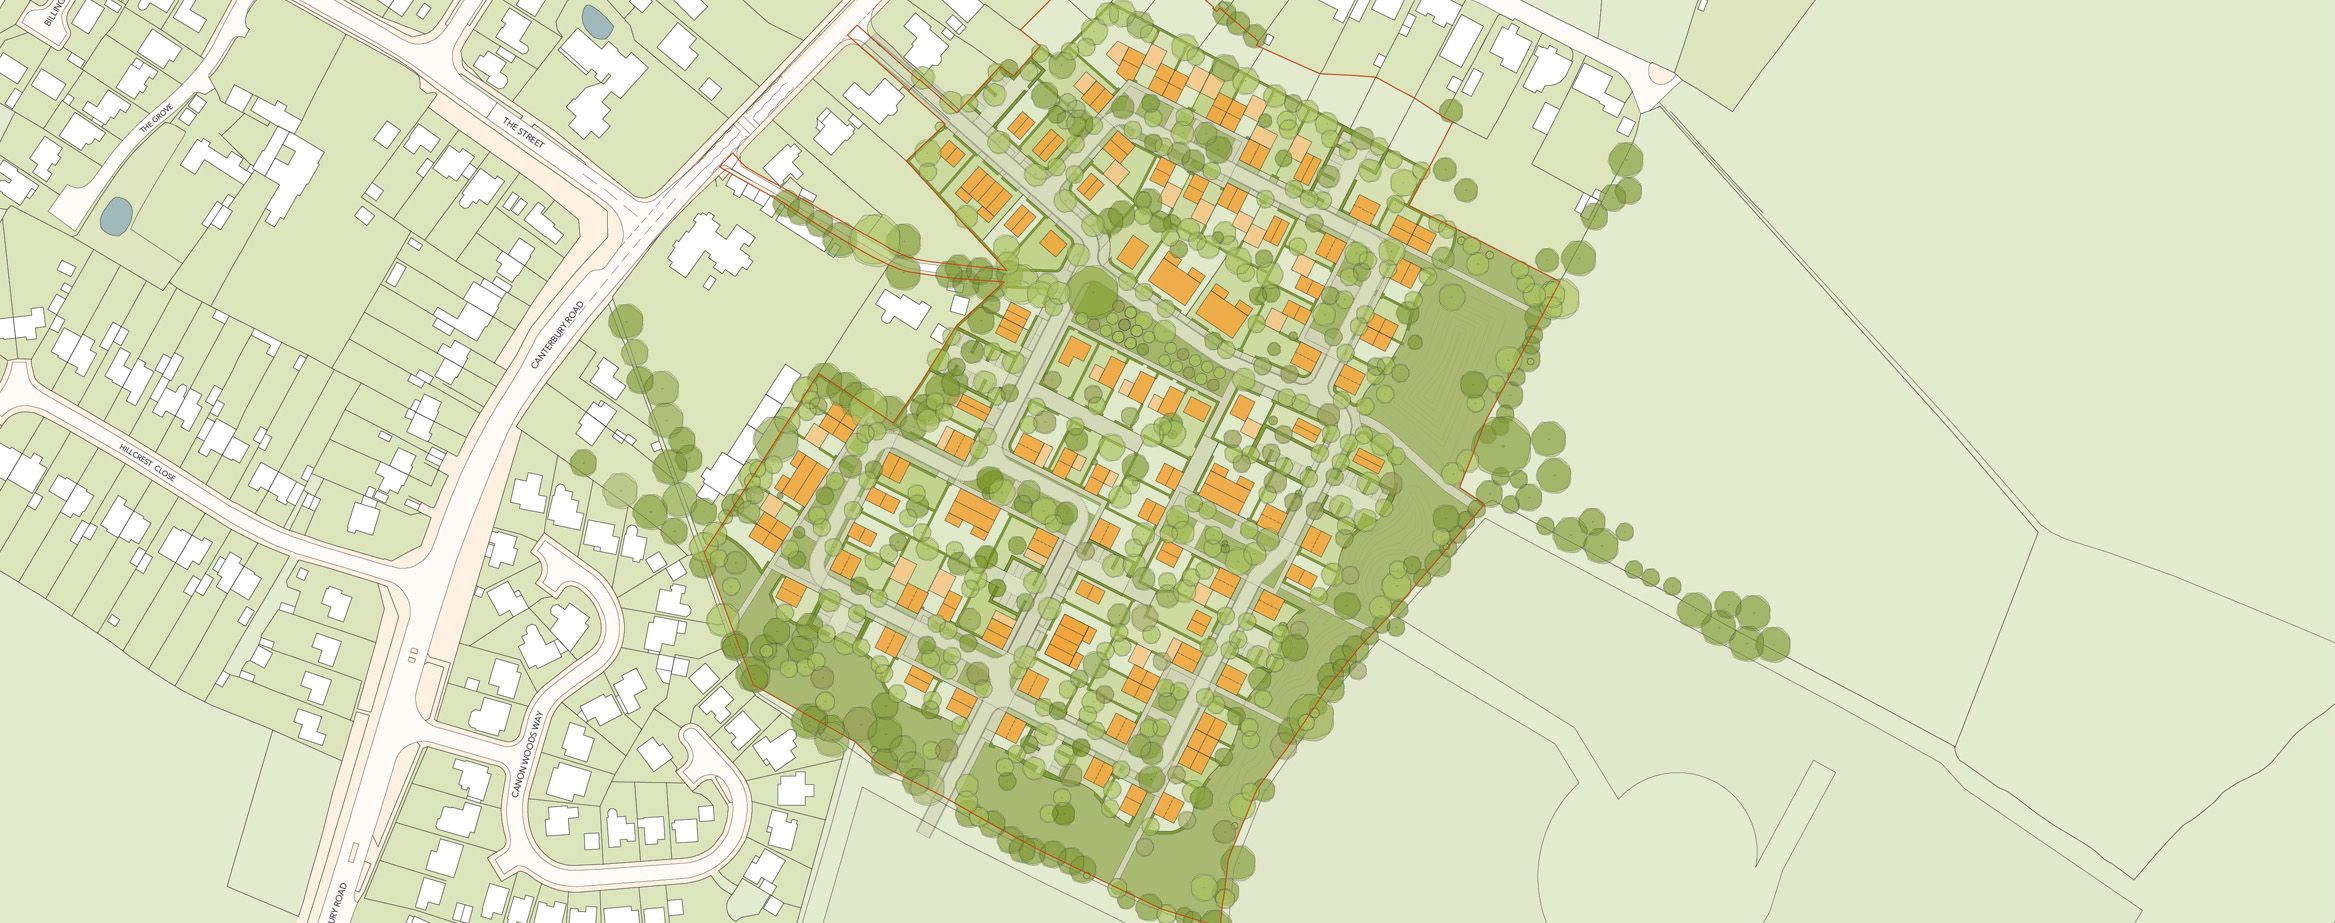 Orchard Farm's detailed planning application now in!